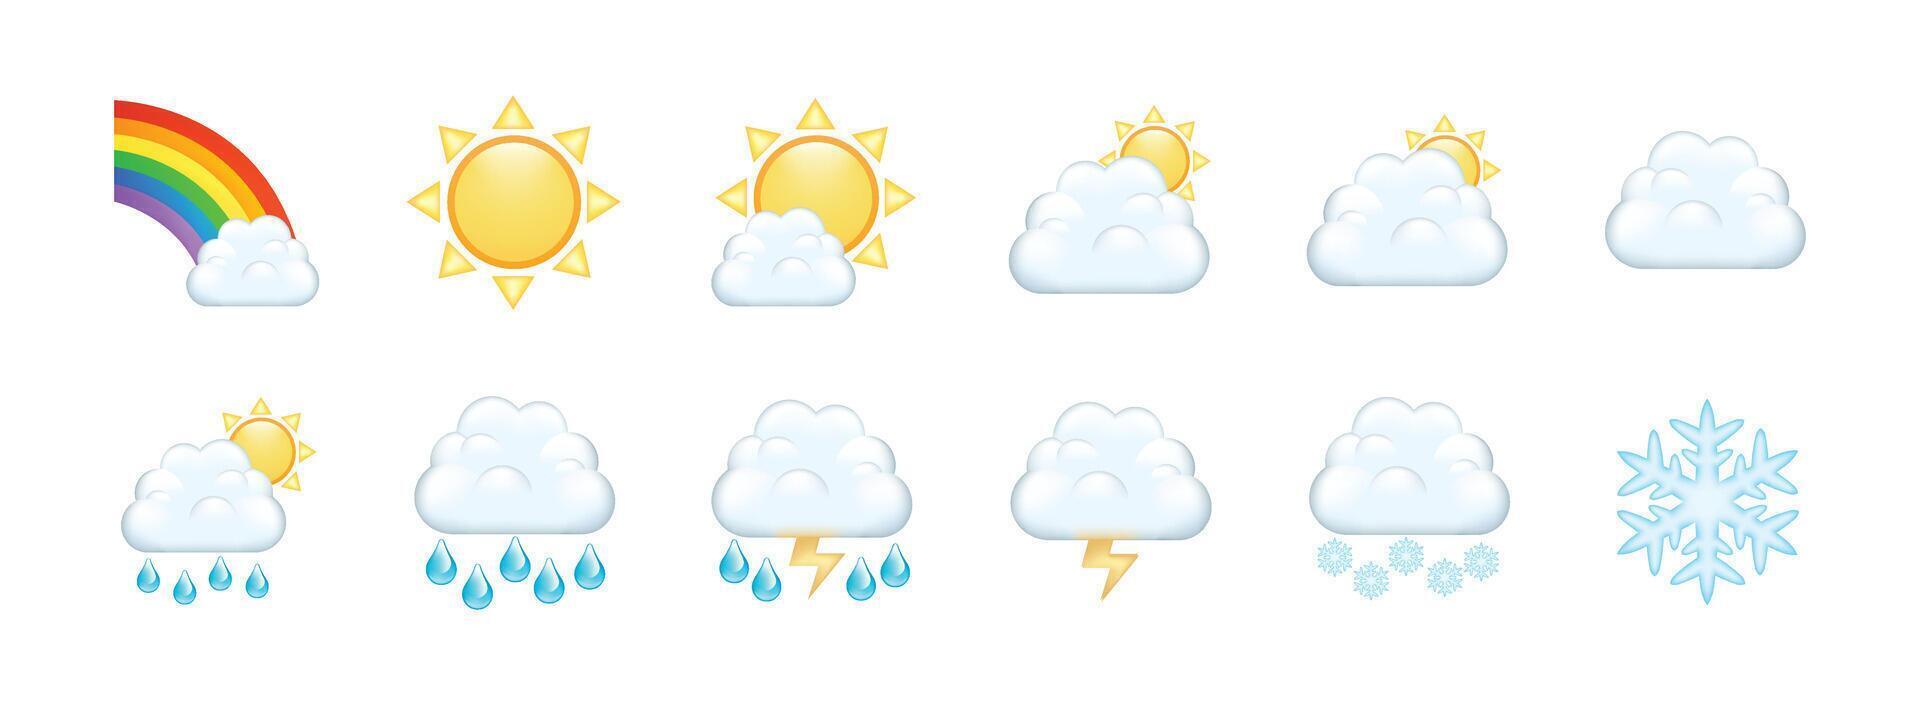 Set of Modern Weather Forecast Icons with rainbow, cloud, sun, rain, snow, lightning, hail. Weather Forecast Icons isolated on white background. vector